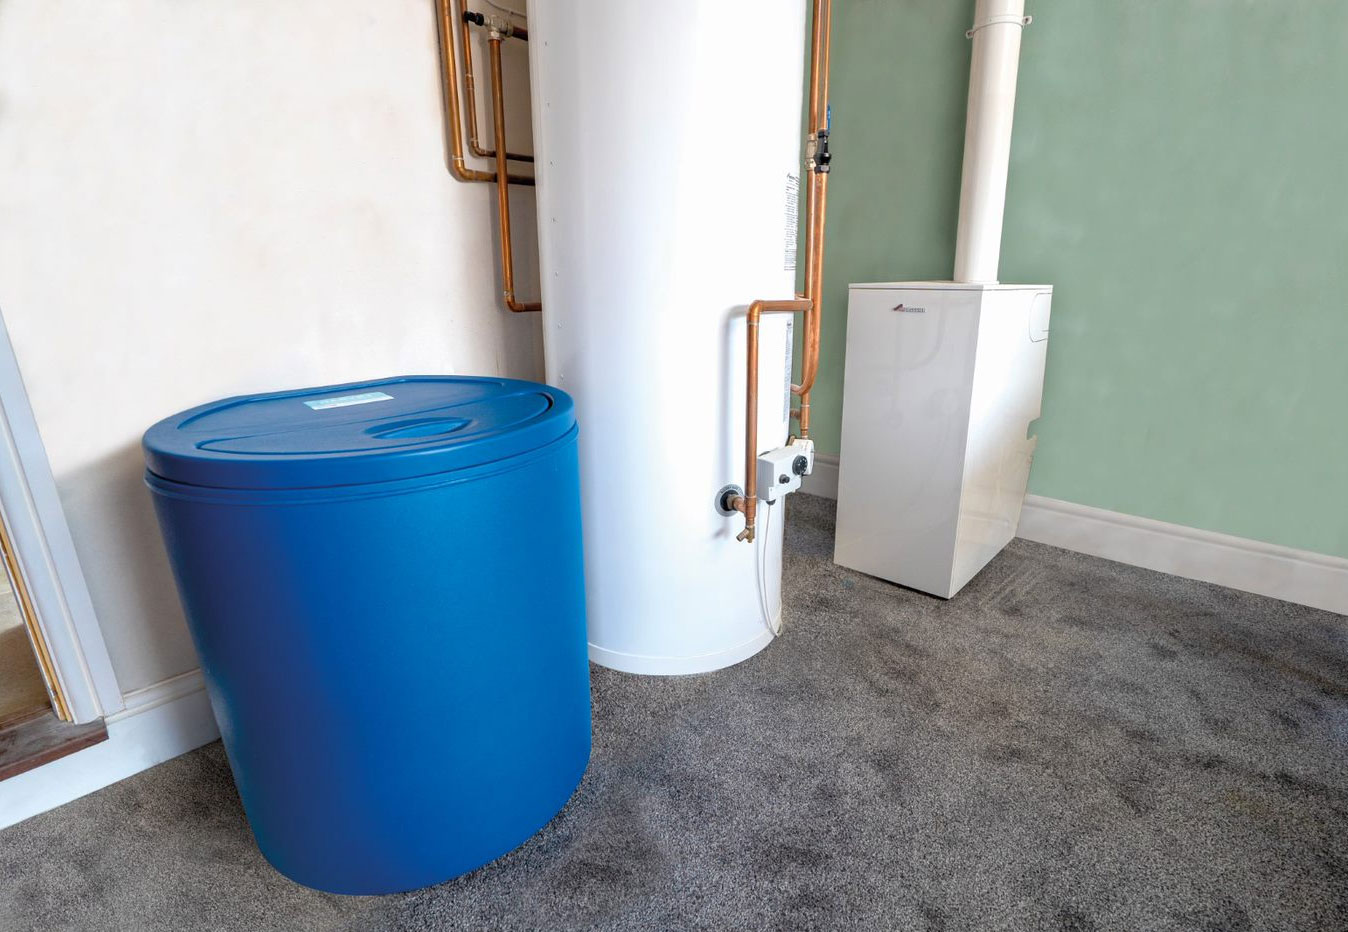 The Big Blue Water Softener in Location